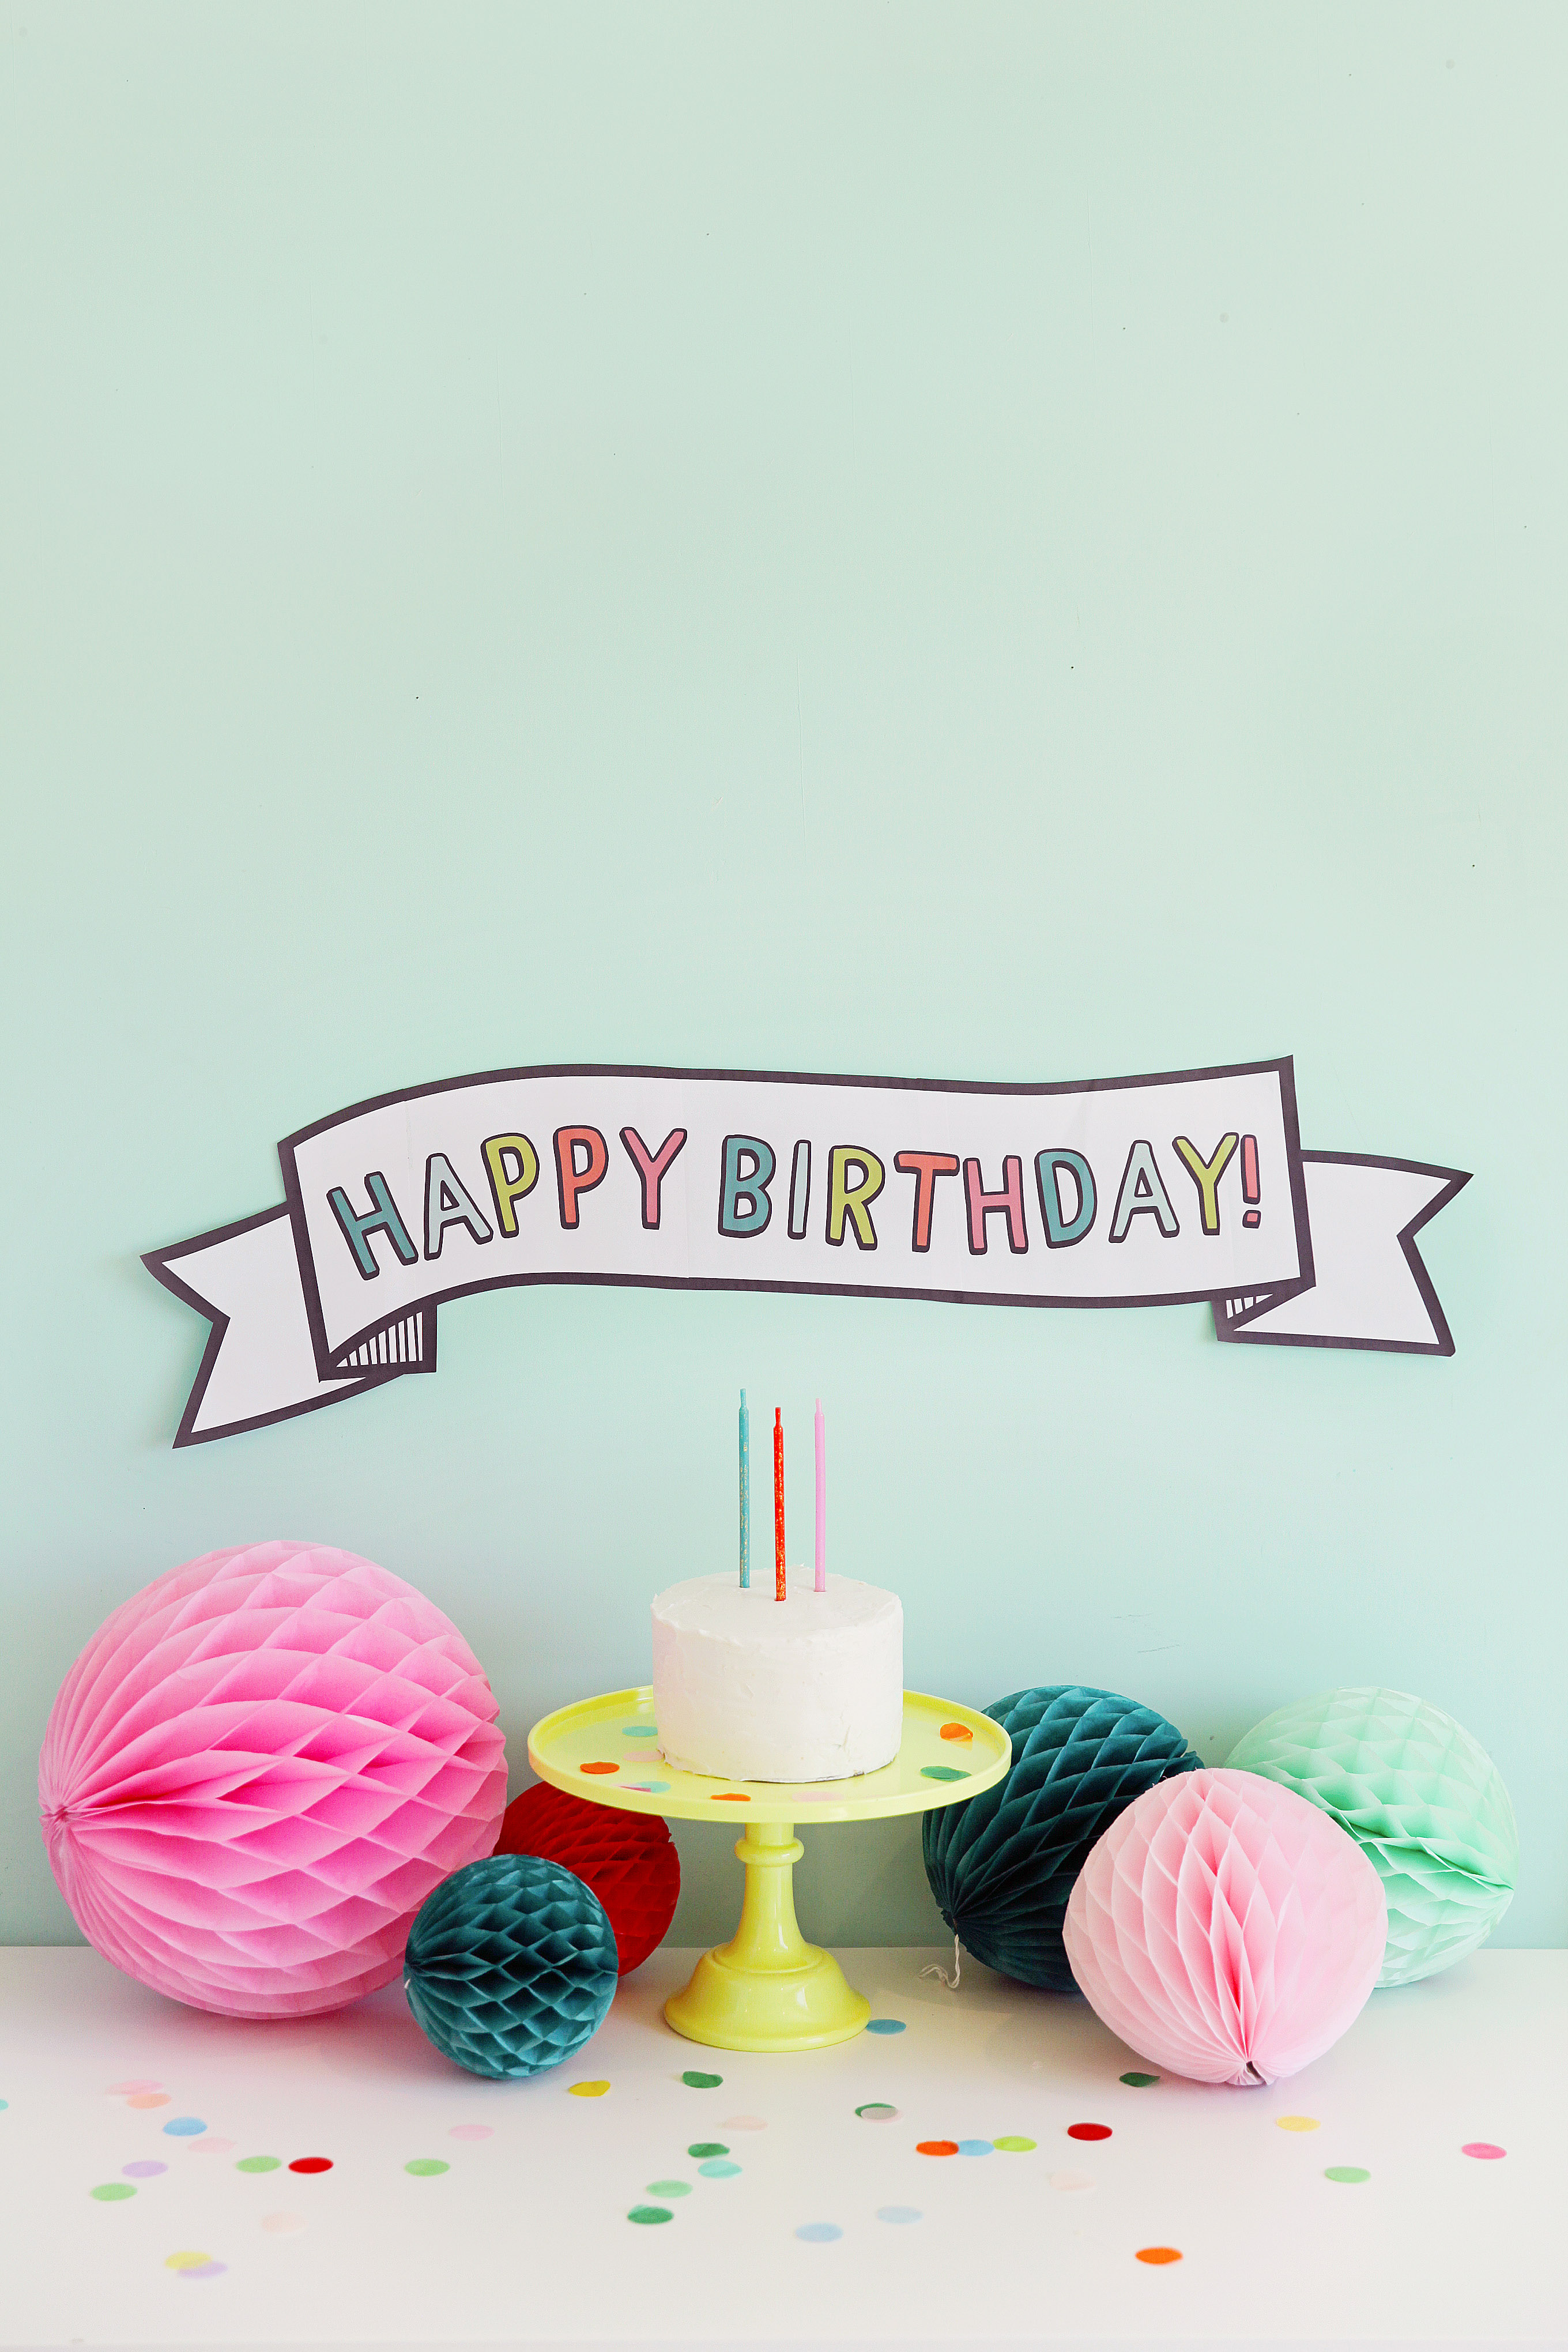 This birthday banner can be printed right at HOME! Takes only 5 min to make, you will never be stressed on birthday decor again.